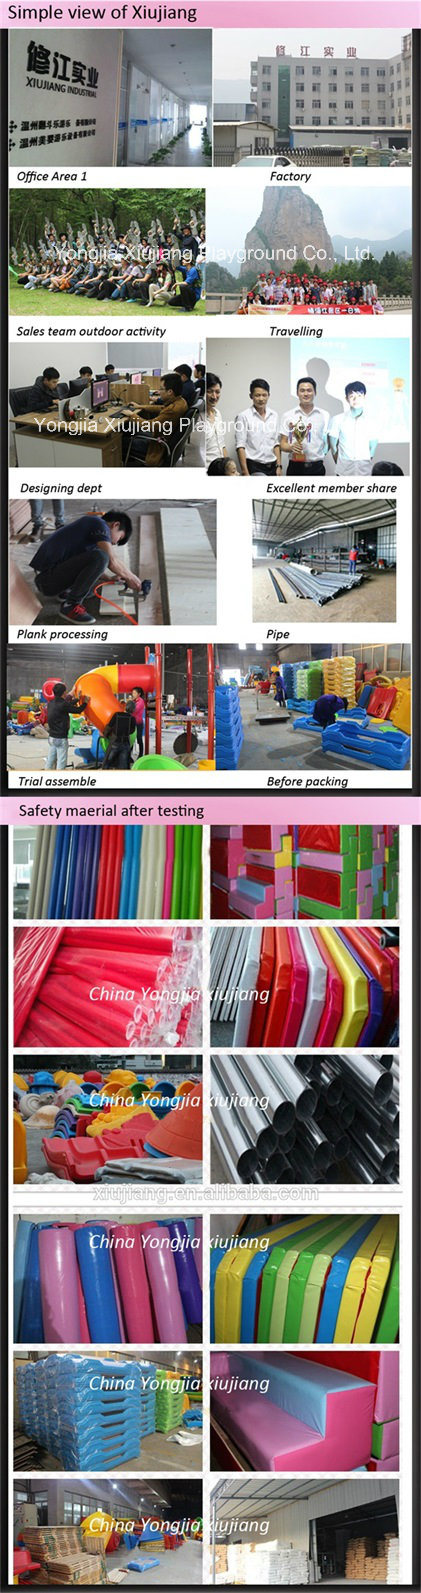 Toddlers and Kids Indoor Soft Playground Play Set for Supermarket